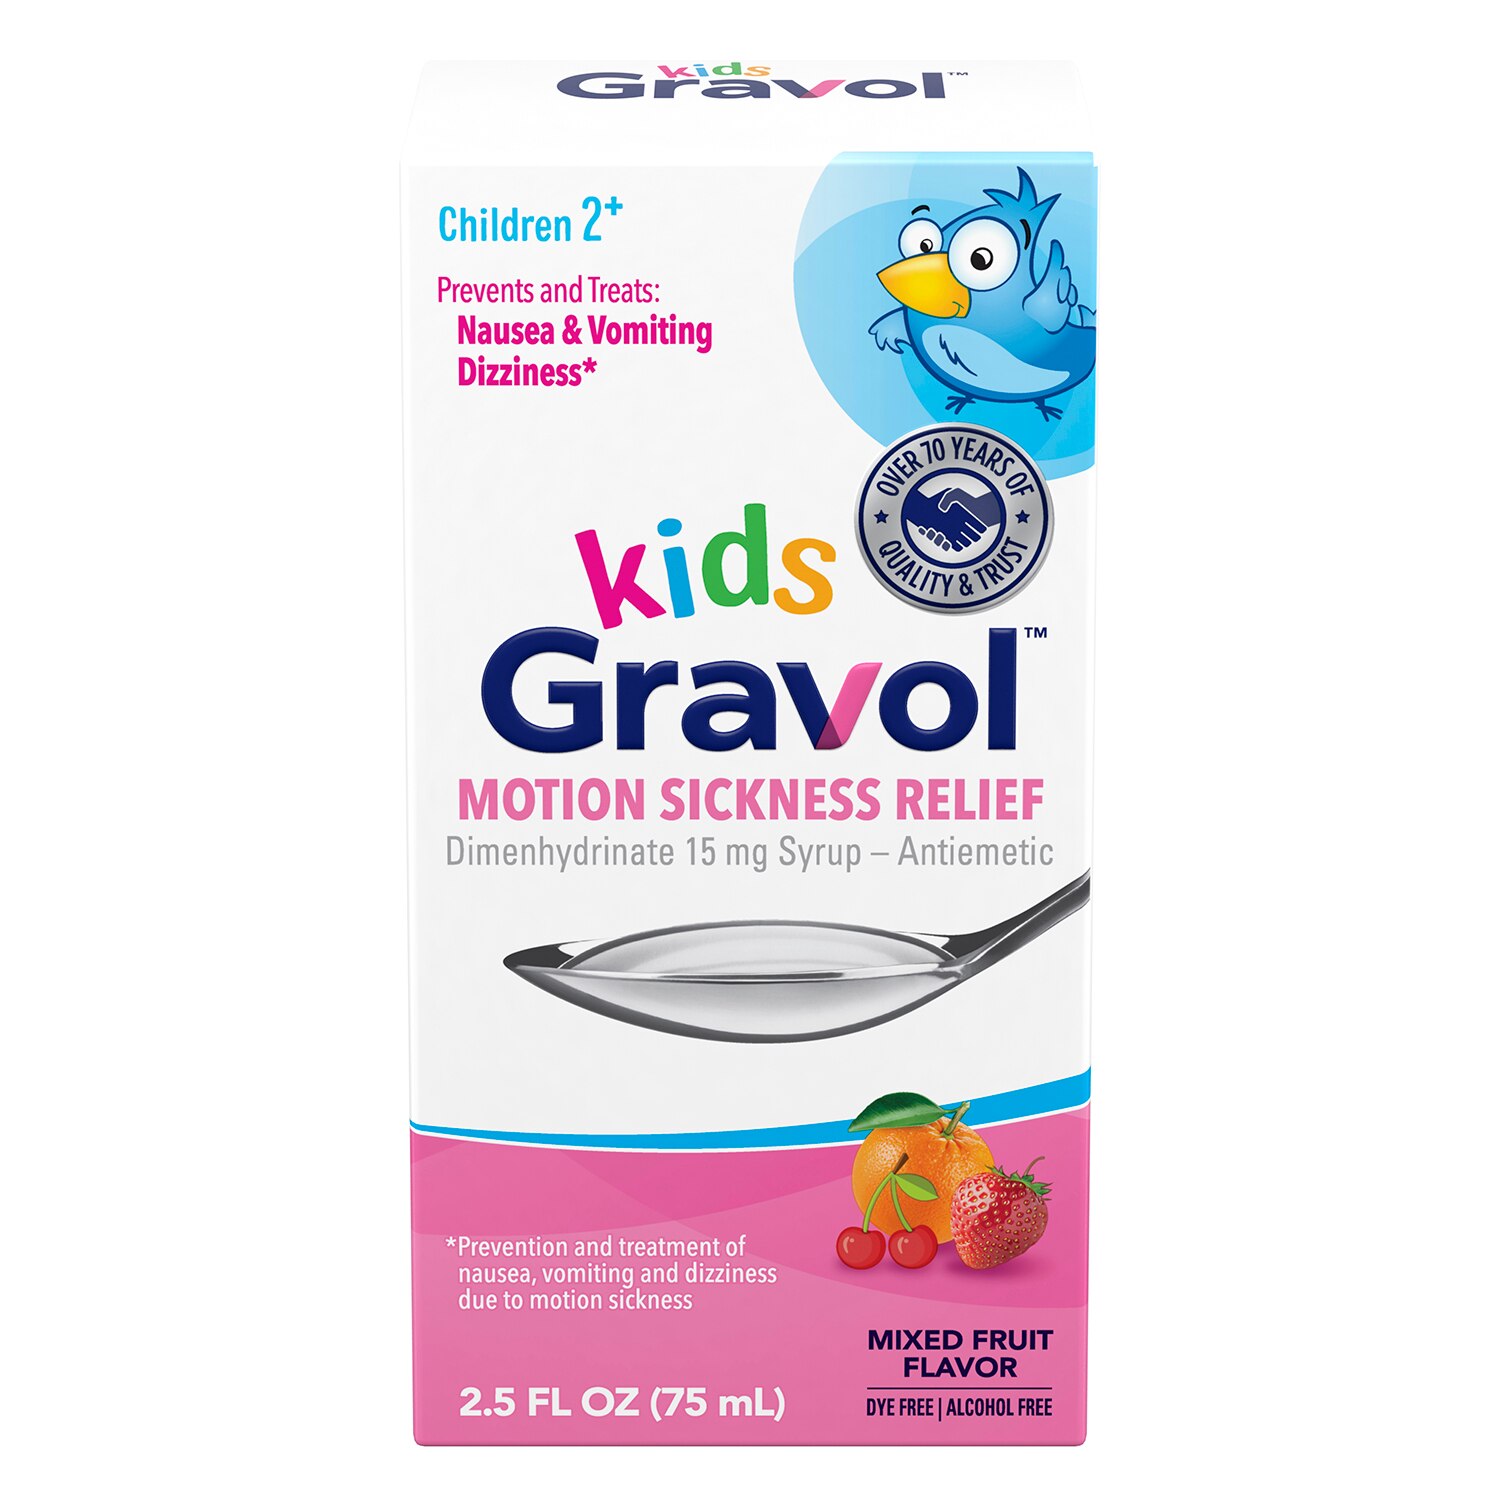 Gravol Kids Motion Sickness Relief - Dimenhydrinate 15 mg Syrup, Mixed Fruit Flavor, 2.5 fl oz